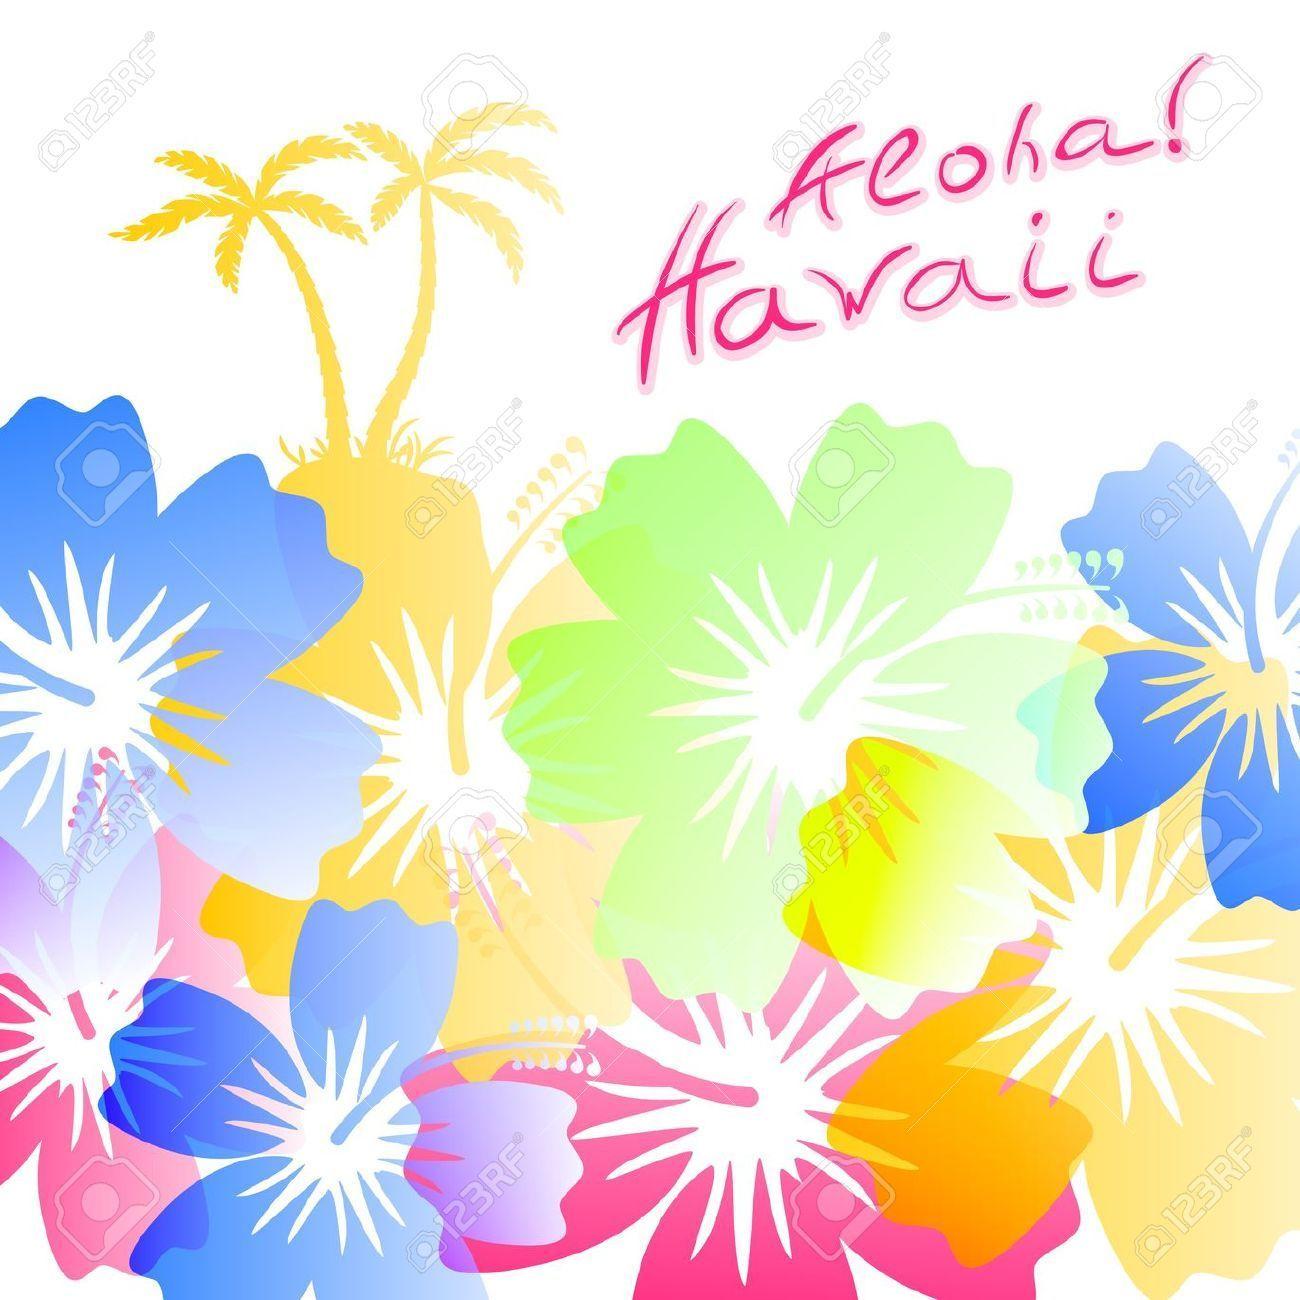 hawaii clipart background - photo #7